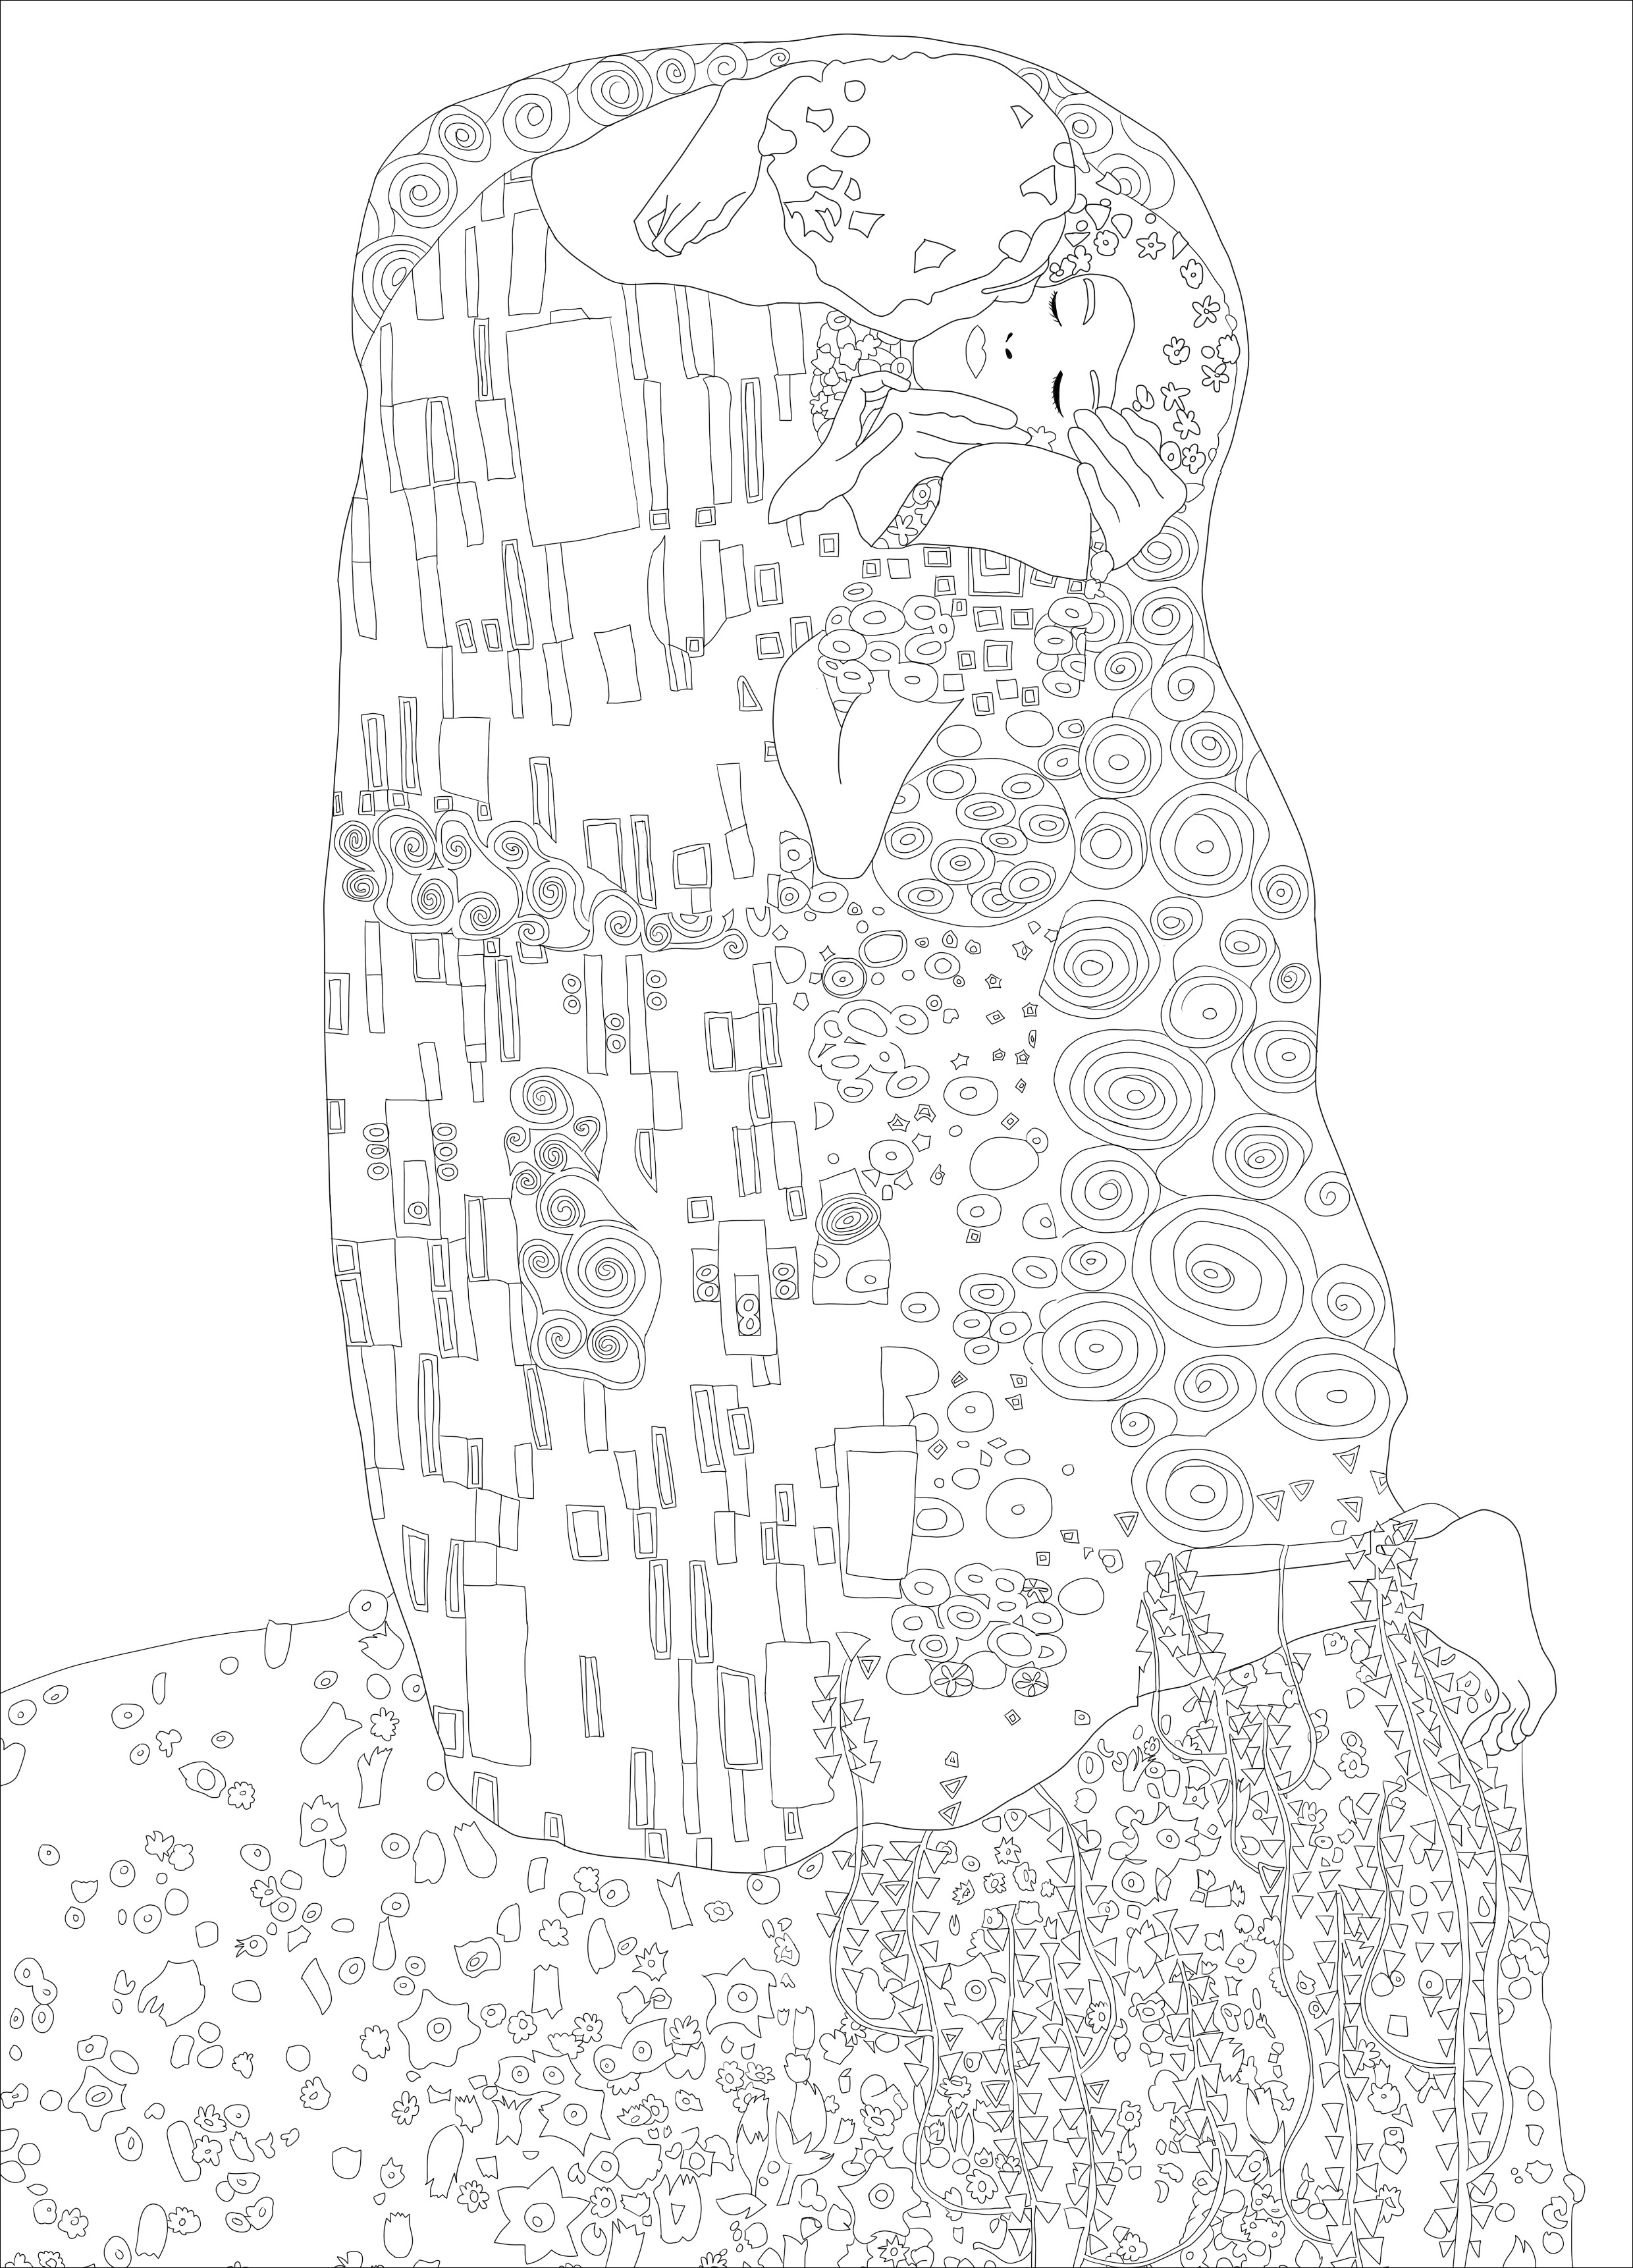 Coloring page created from the painting 'The Kiss' by Gustav Klimt. The painting is considered a masterpiece of the Art Nouveau movement and is one of Klimt's most popular works. It is currently housed at the Österreichische Galerie Belvedere museum in Vienna, Austria. The painting is known for its sensual and erotic nature, and its use of gold leaf and other decorative elements in the composition.